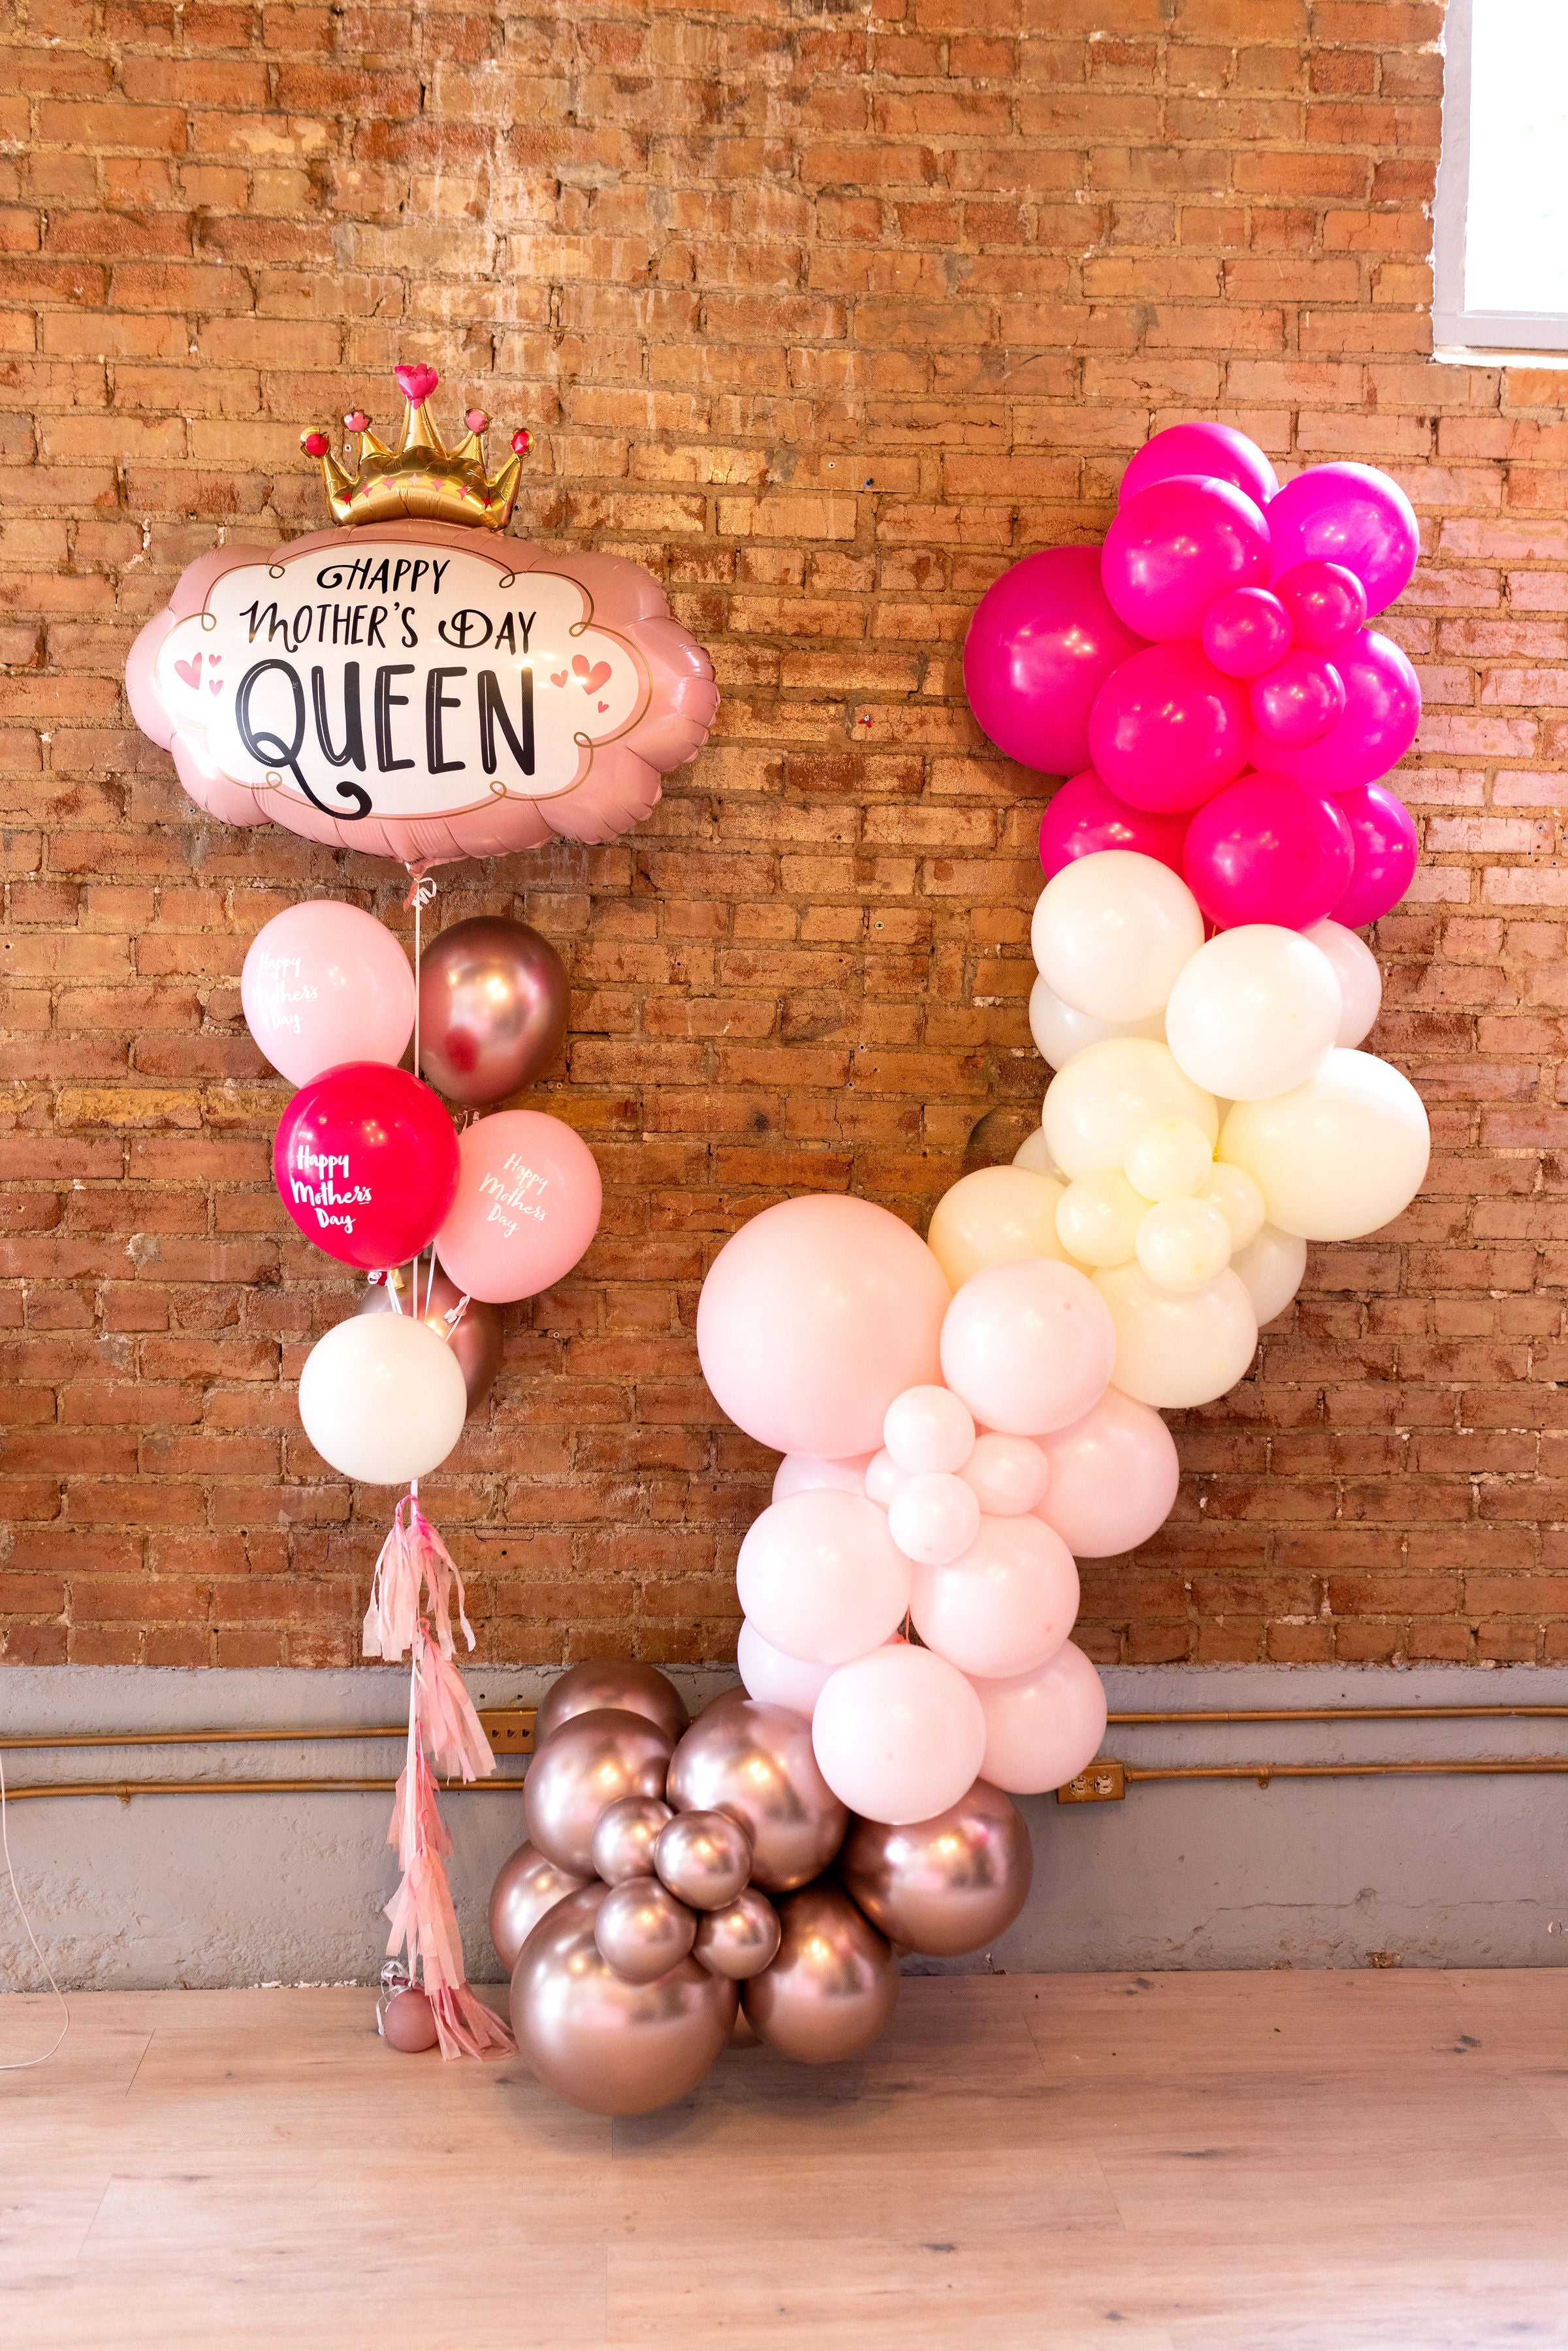 Colorful balloons with 'Happy Mother's Day' messages, perfect for celebrating Mom's special day